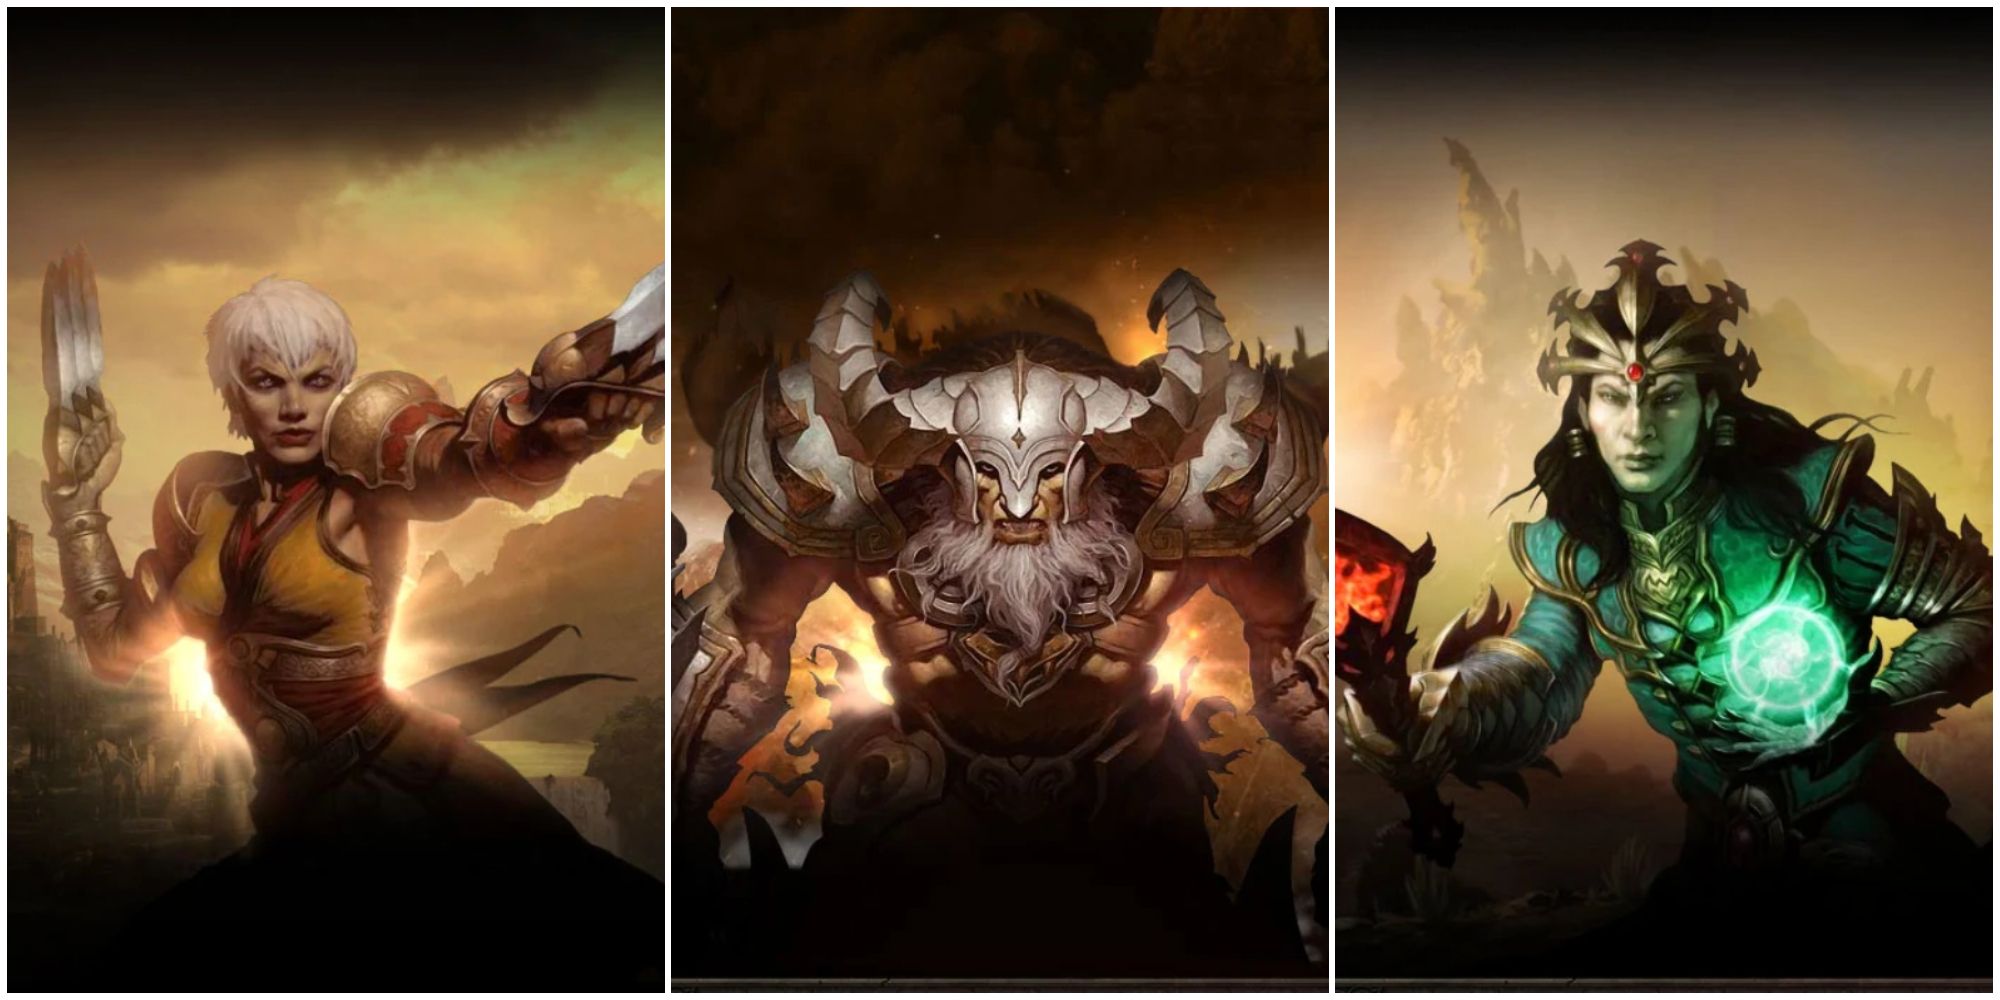 Split images of Monk, Barbarian and Wizard in Diablo 3.